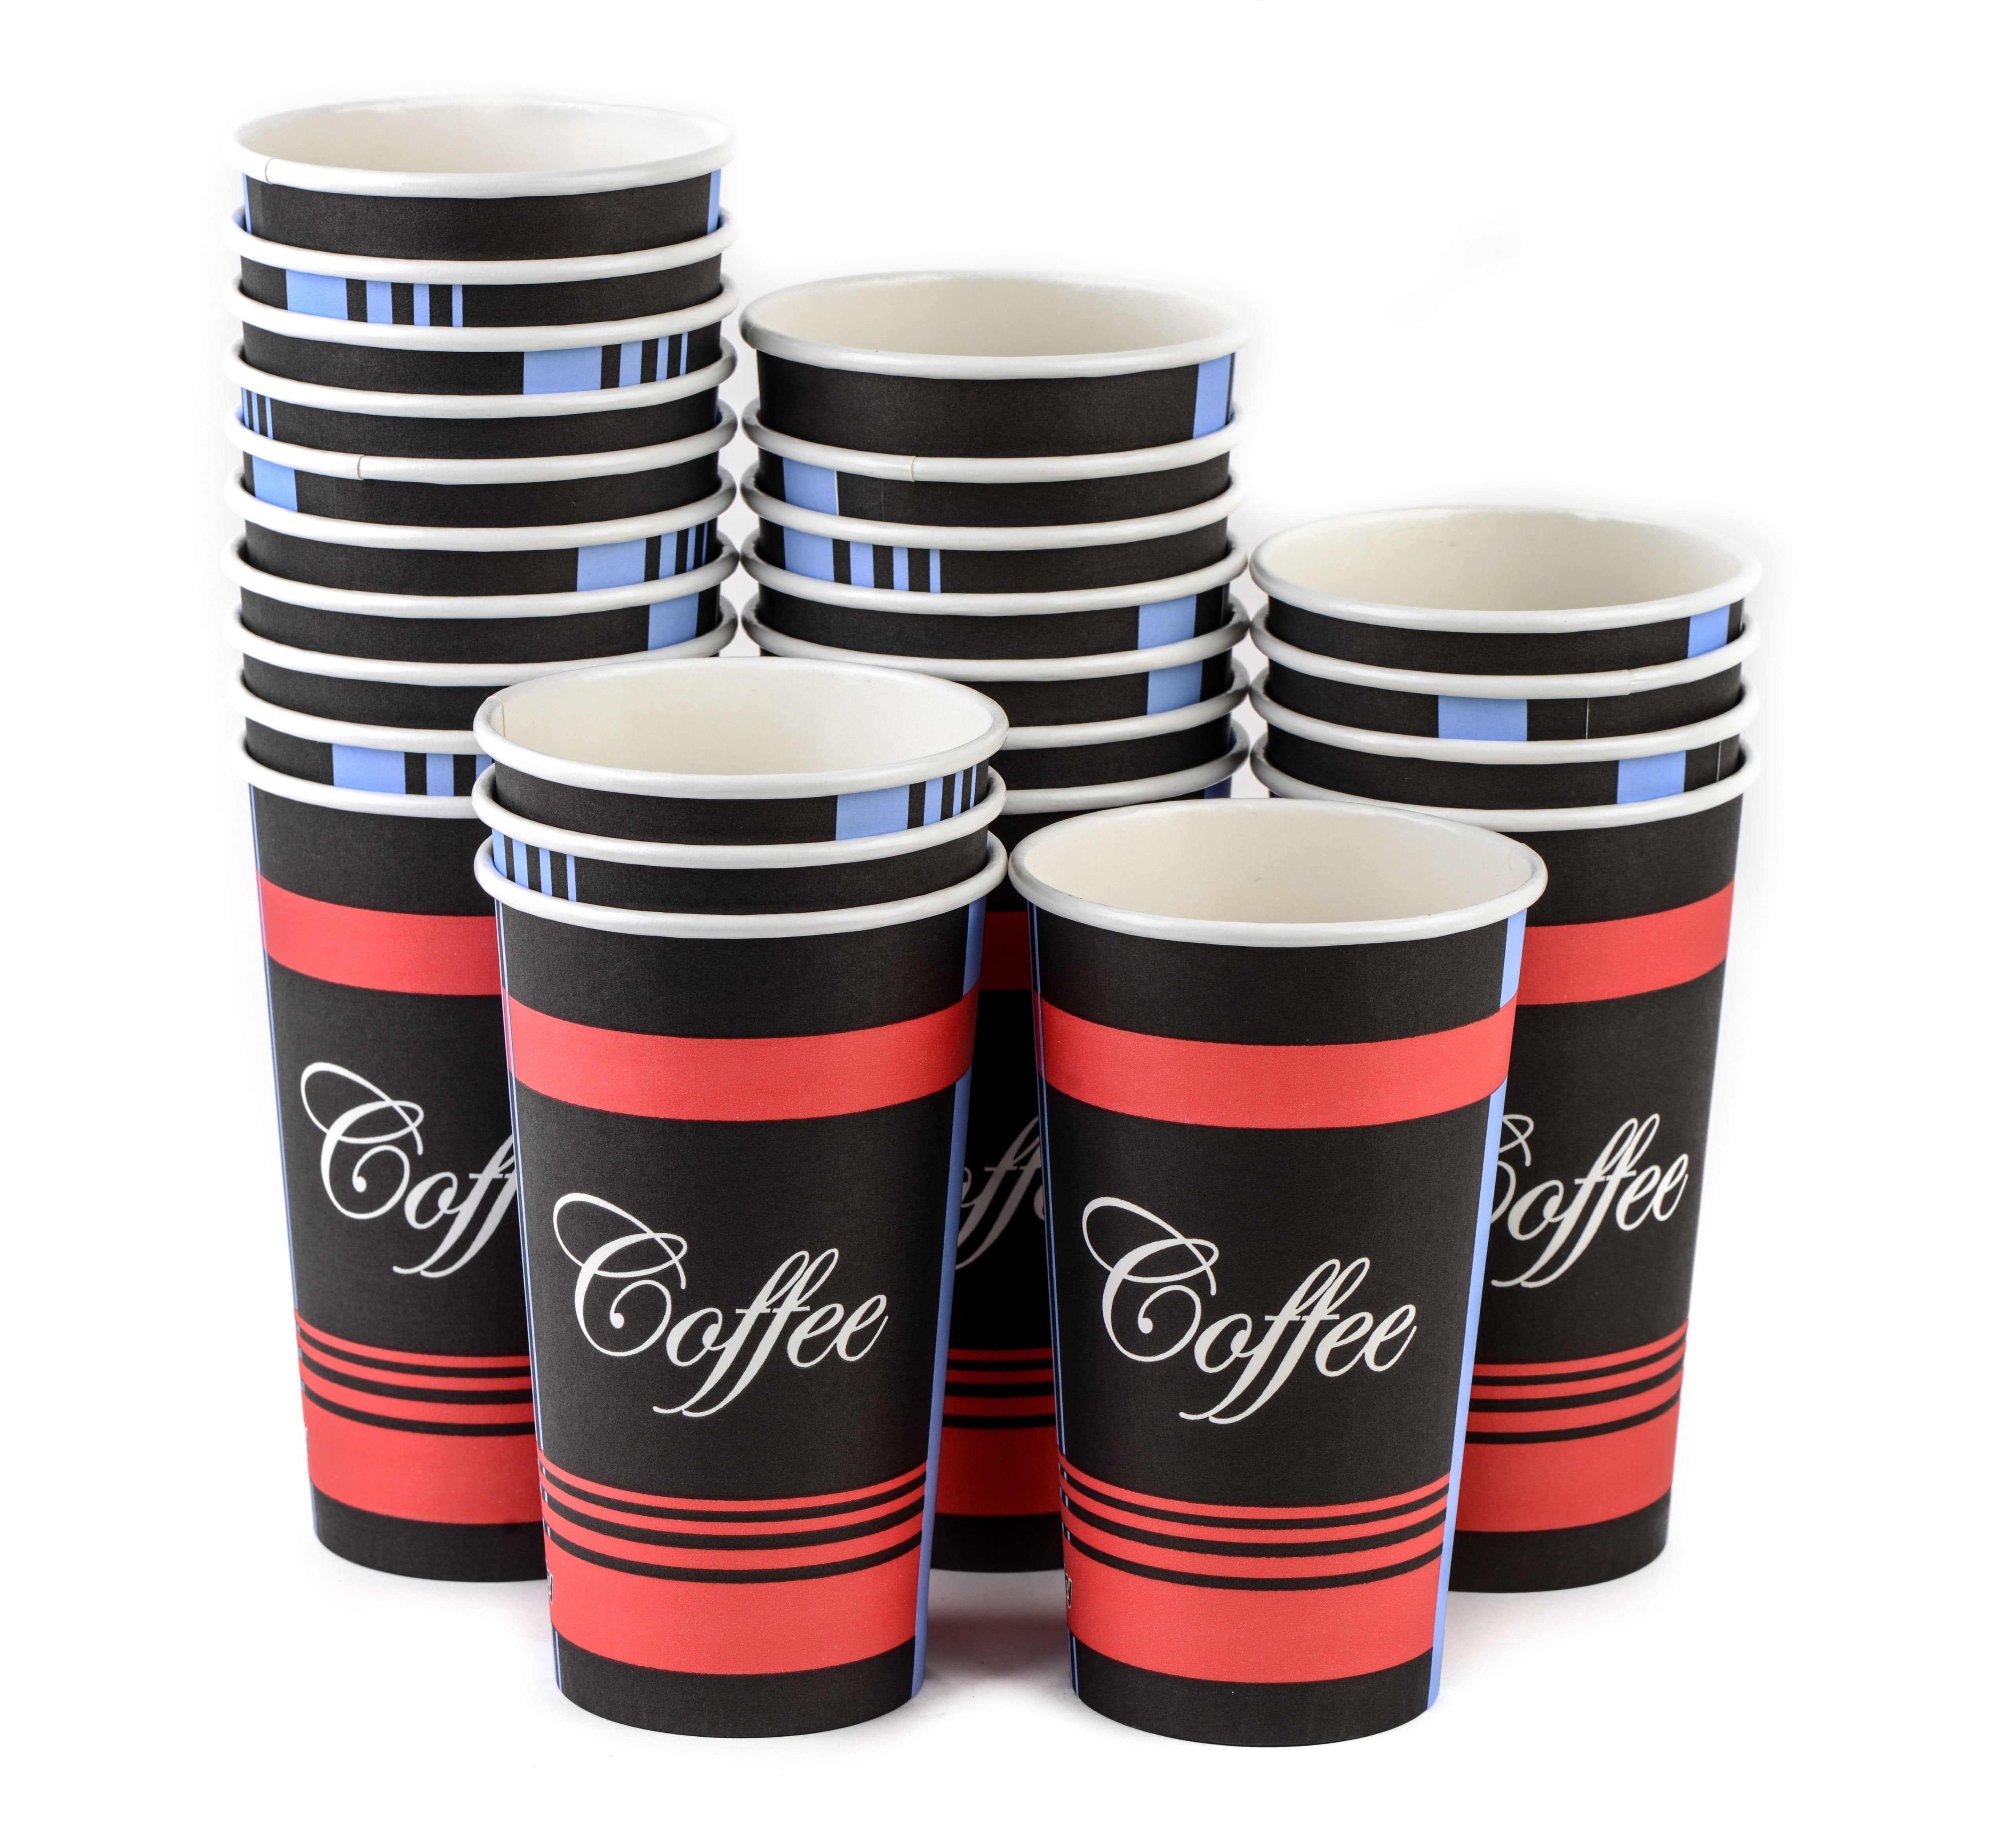 12oz Paper Coffee Cups Details about   OzBSP 100 Pack 12 oz Disposable Coffee Cups with Lids 